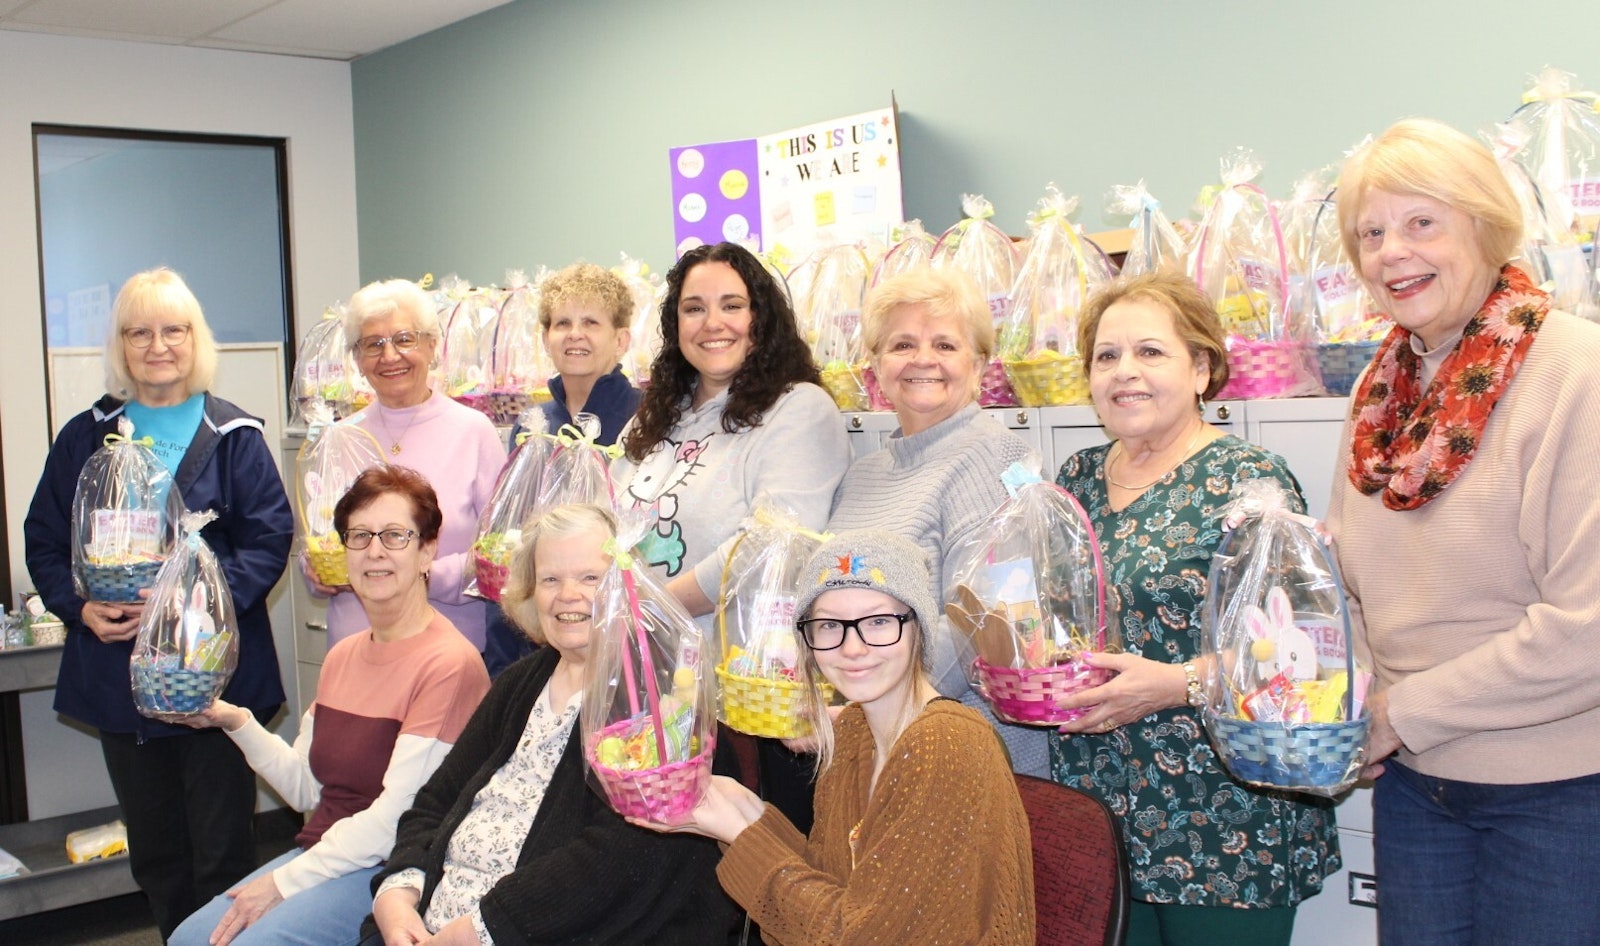 Members of the Council of Catholic Women of the Archdiocese of Detroit show the Easter baskets they assembled on March 16. The baskets will be delivered to foster families in Metro Detroit.